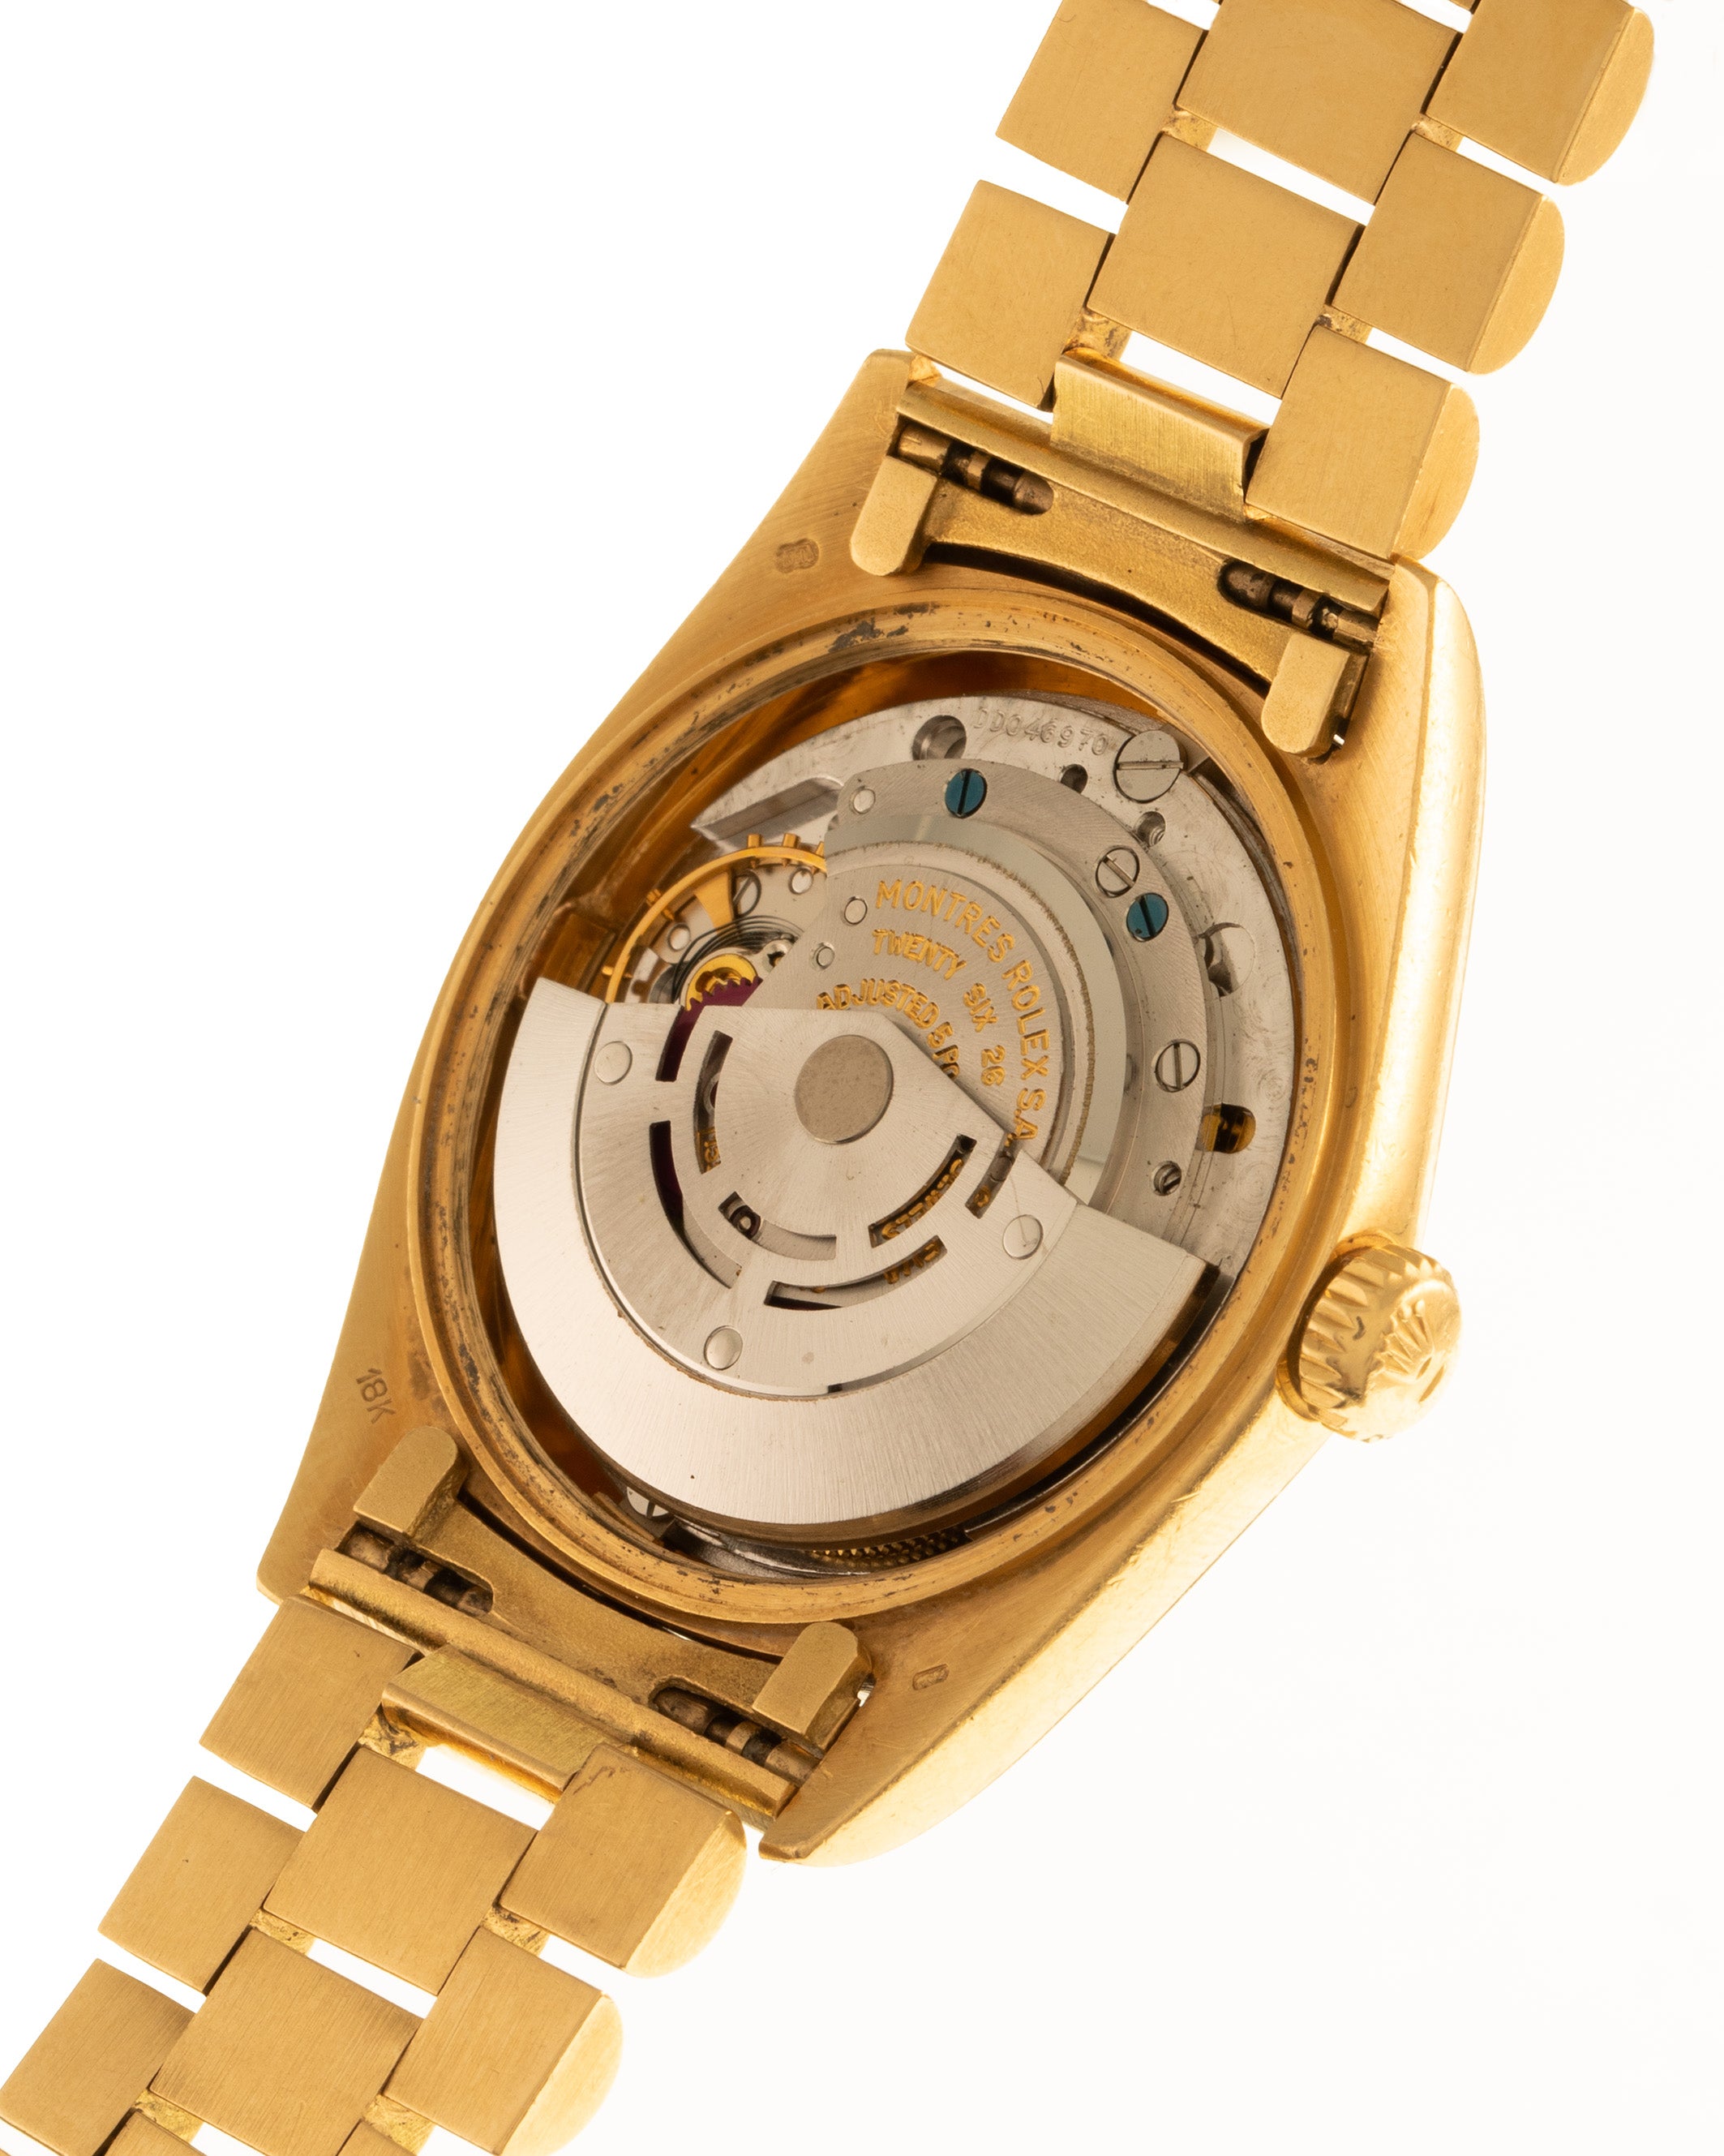 Rolex Oyster Perpetual Day Date with gold bracelet movement